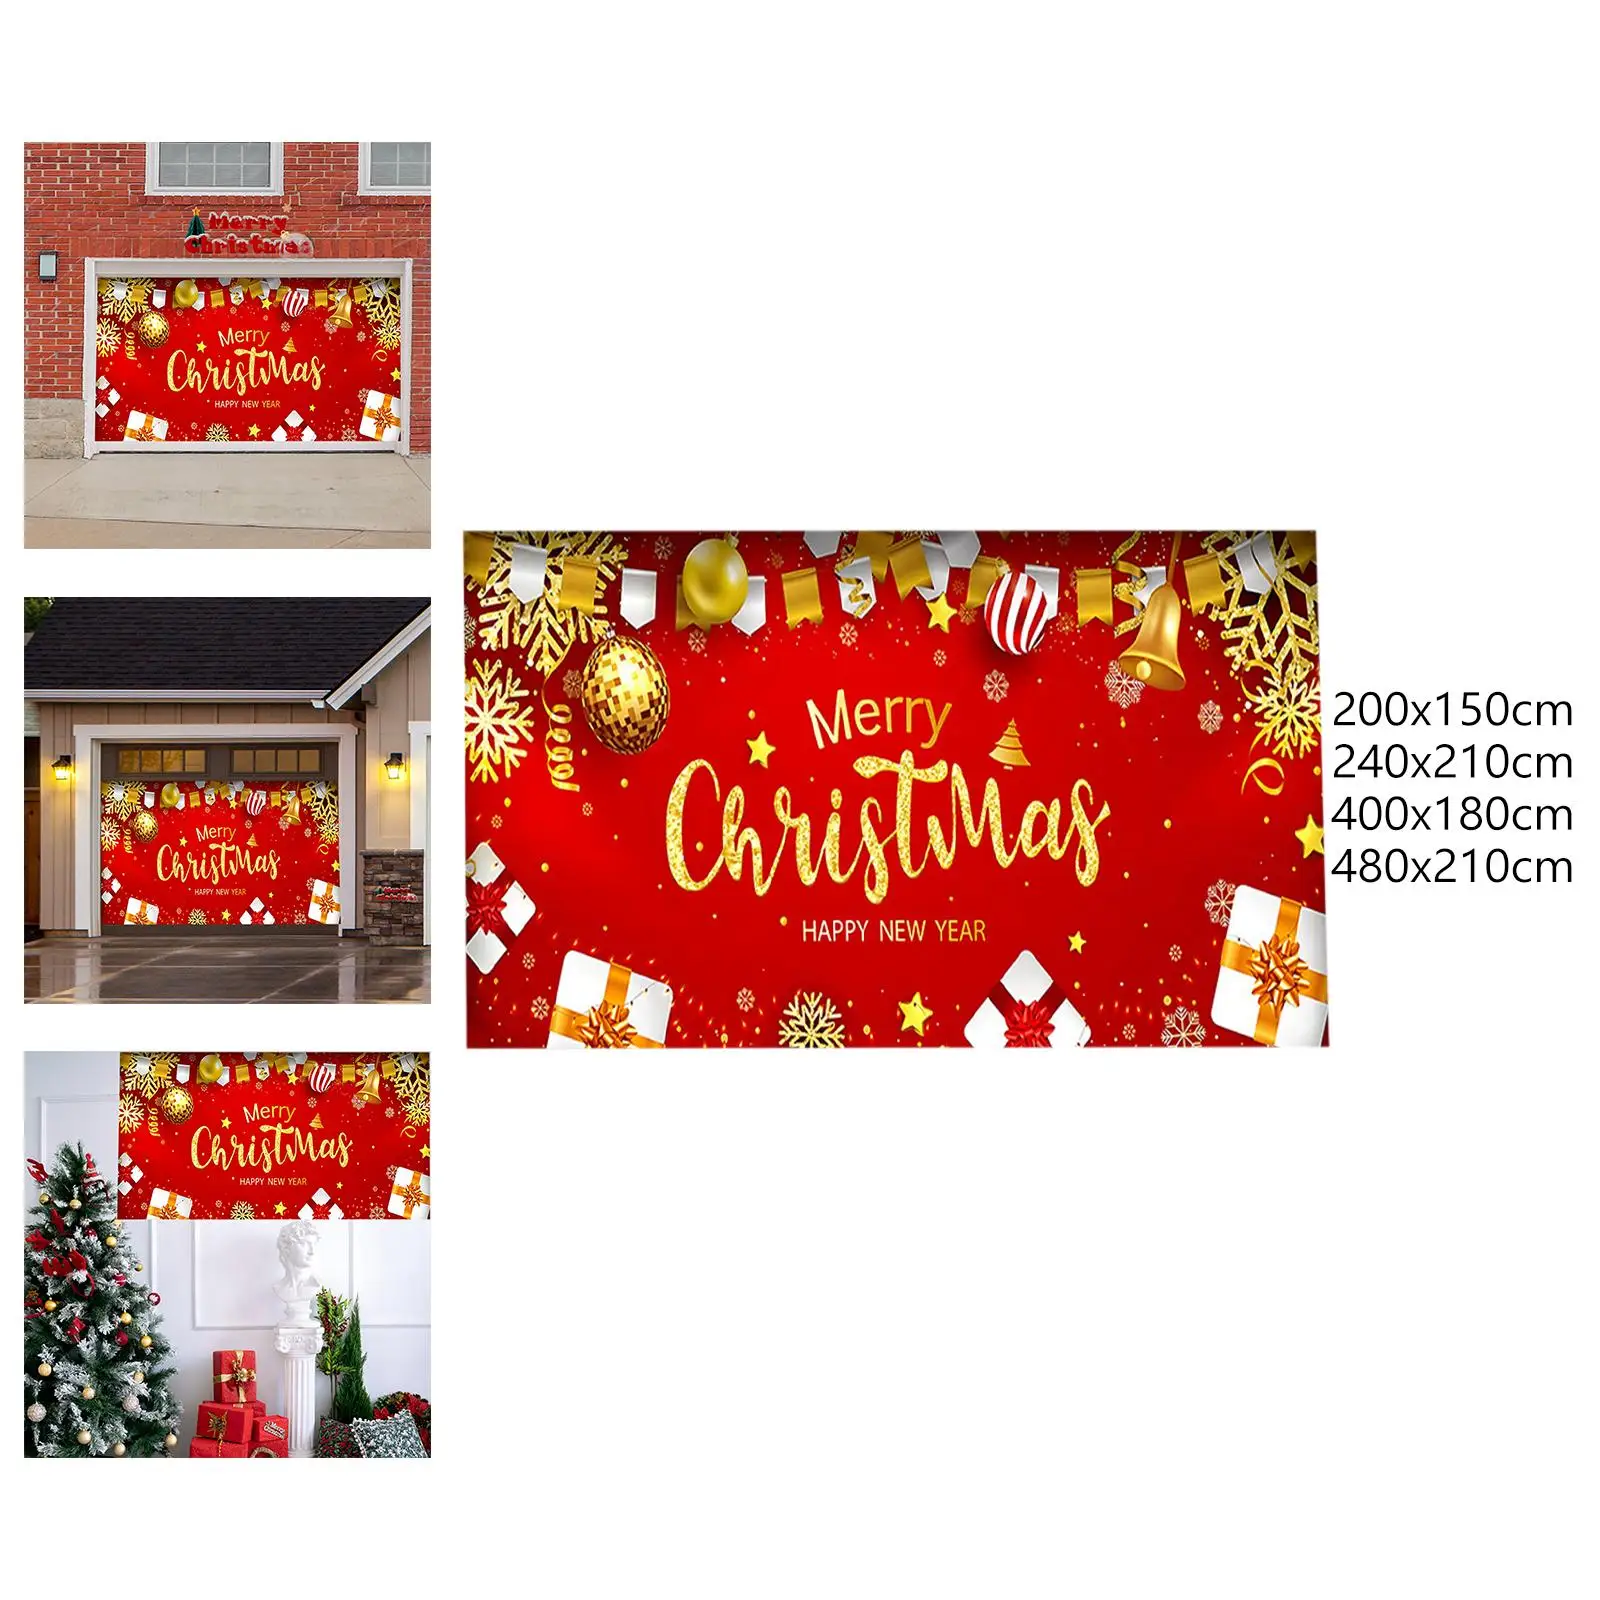 Large Christmas Garage Door Banner Happy New Year Backdrop Decor Red Merry Christmas Decorations Xmas Garage Door Mural for Home